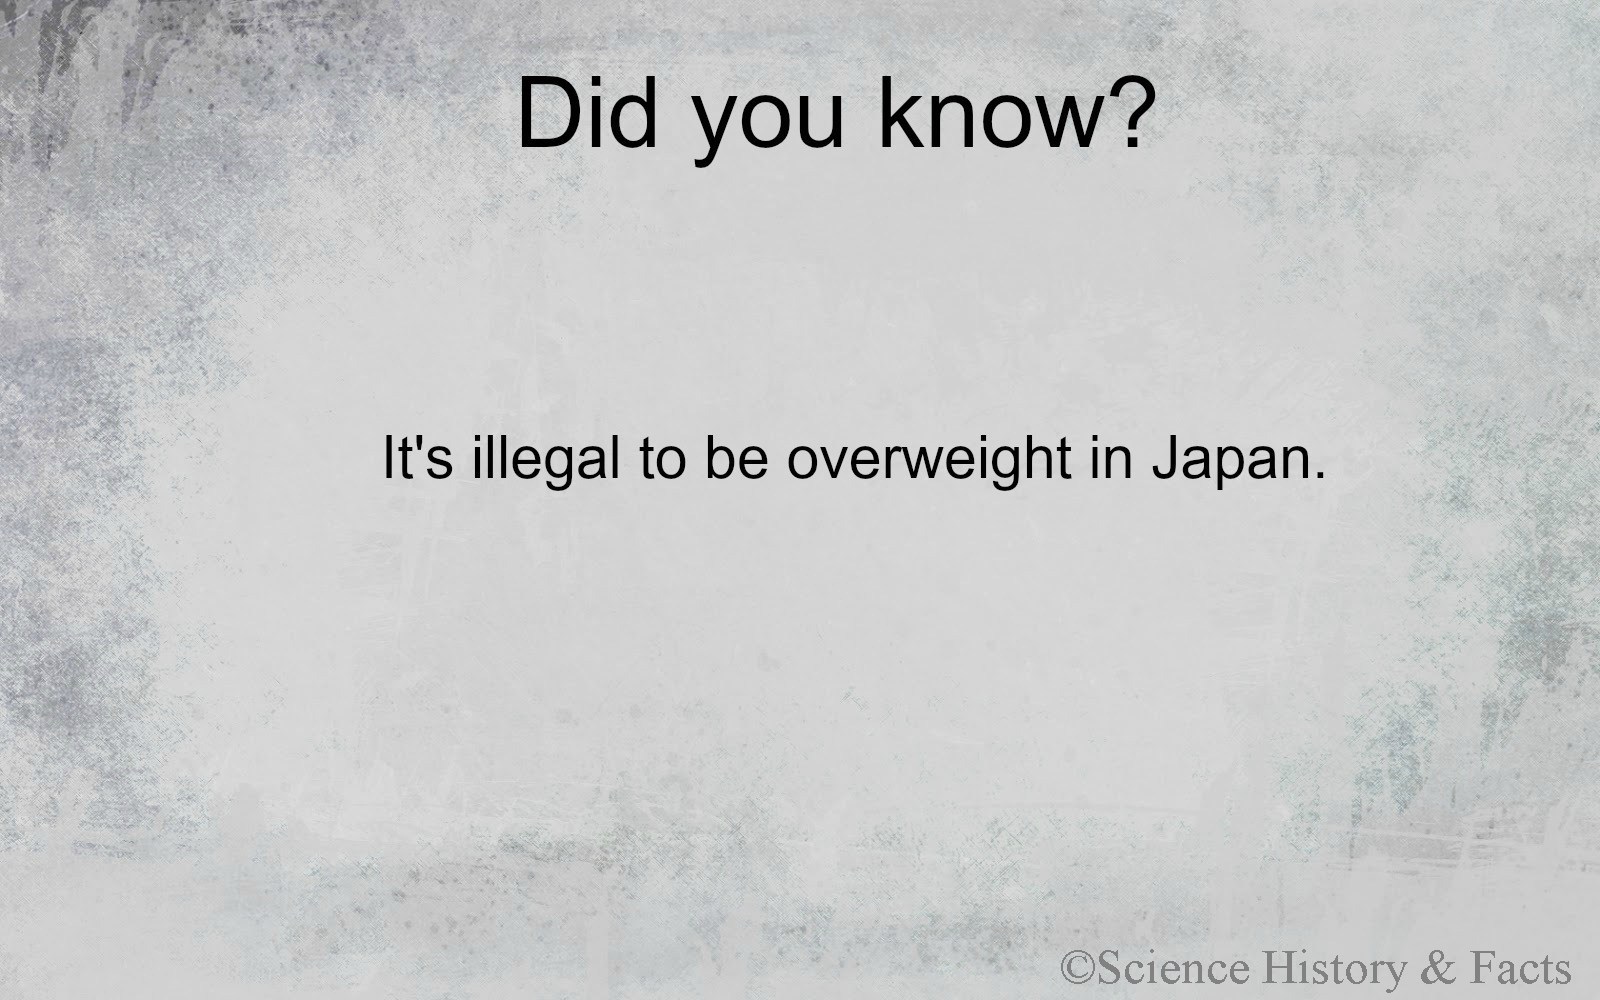 dyk, illegal to be overweight, japan